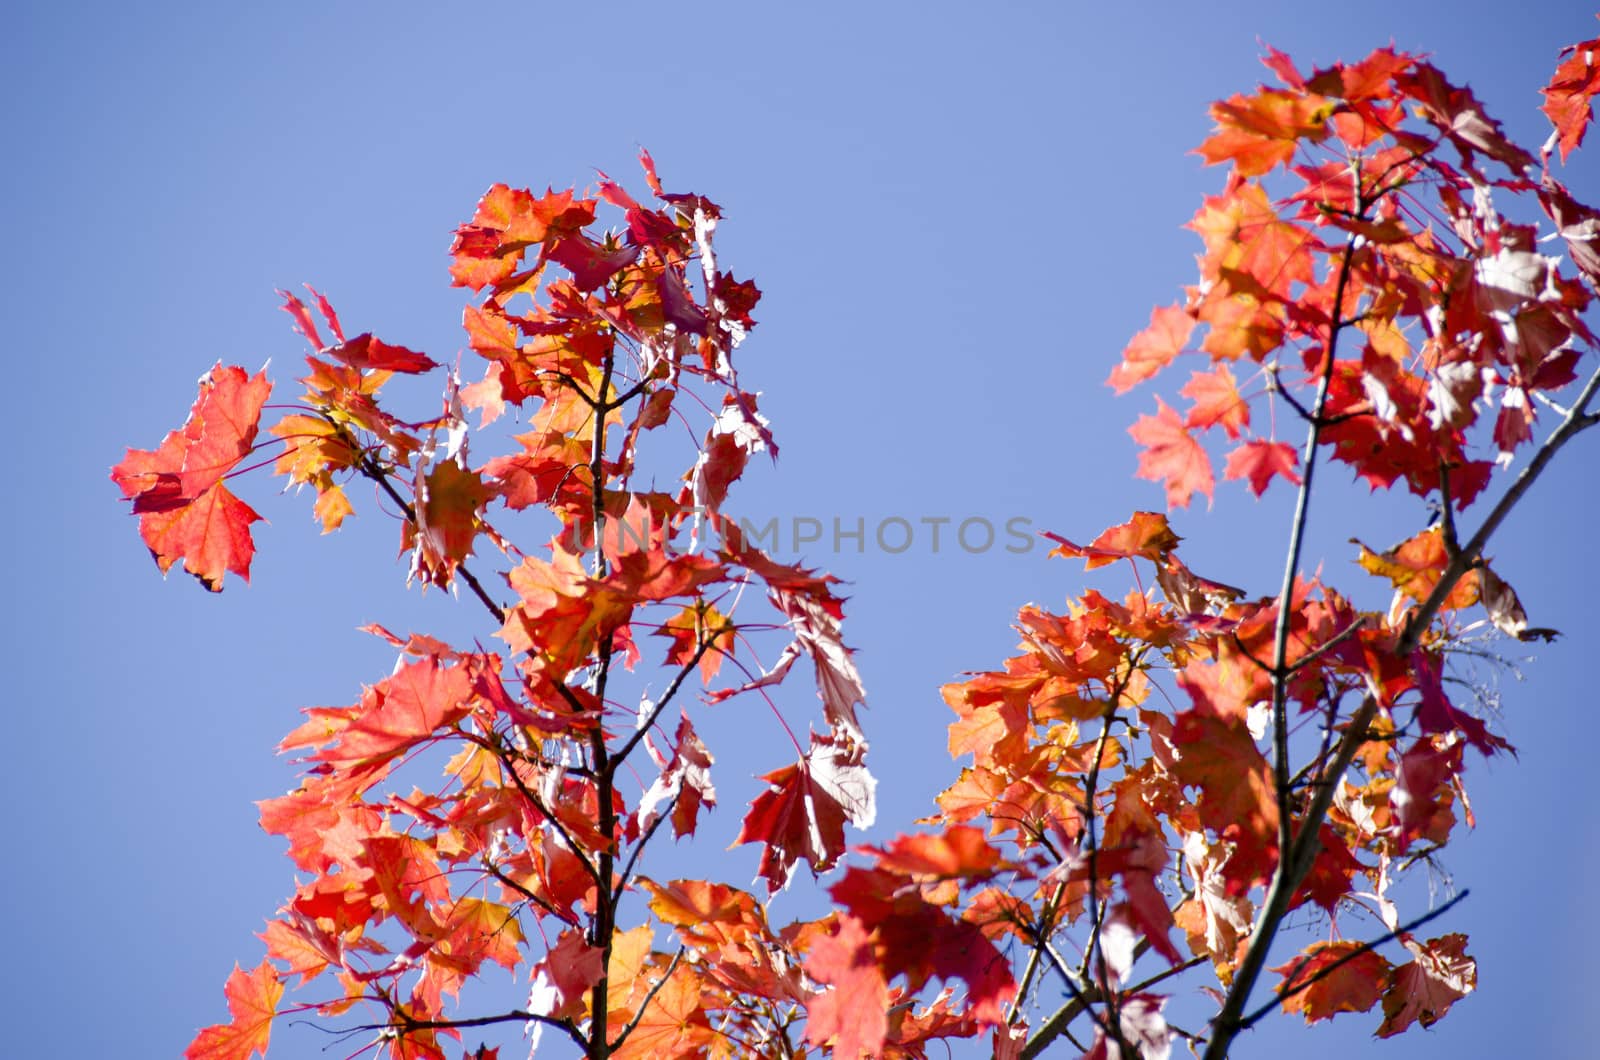 A branch of yellow red leaves of maple in backlight, in front of a blue sky